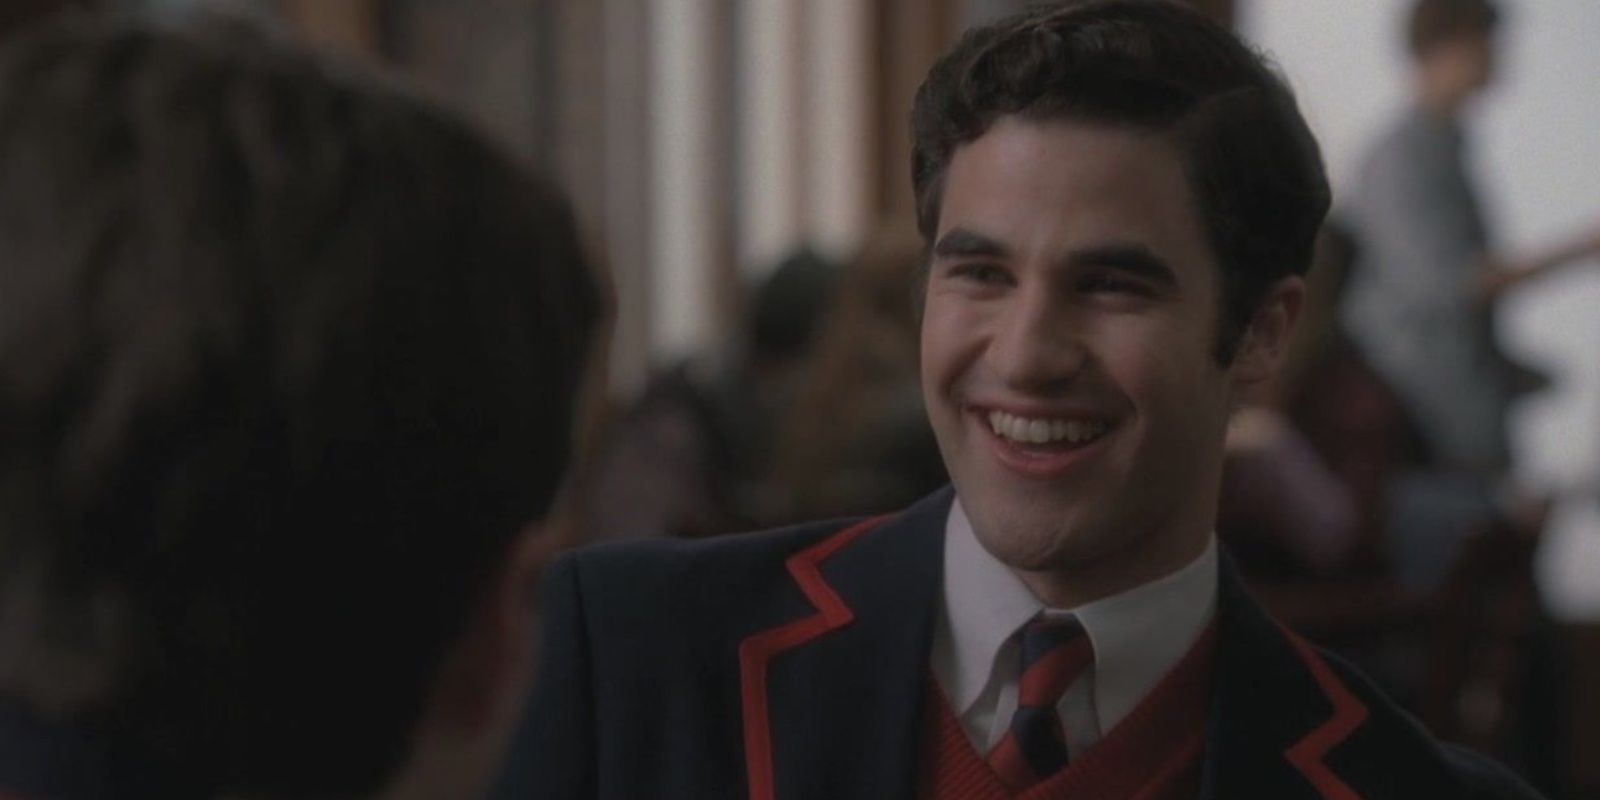 Blaine Anderson laughing in his school uniform